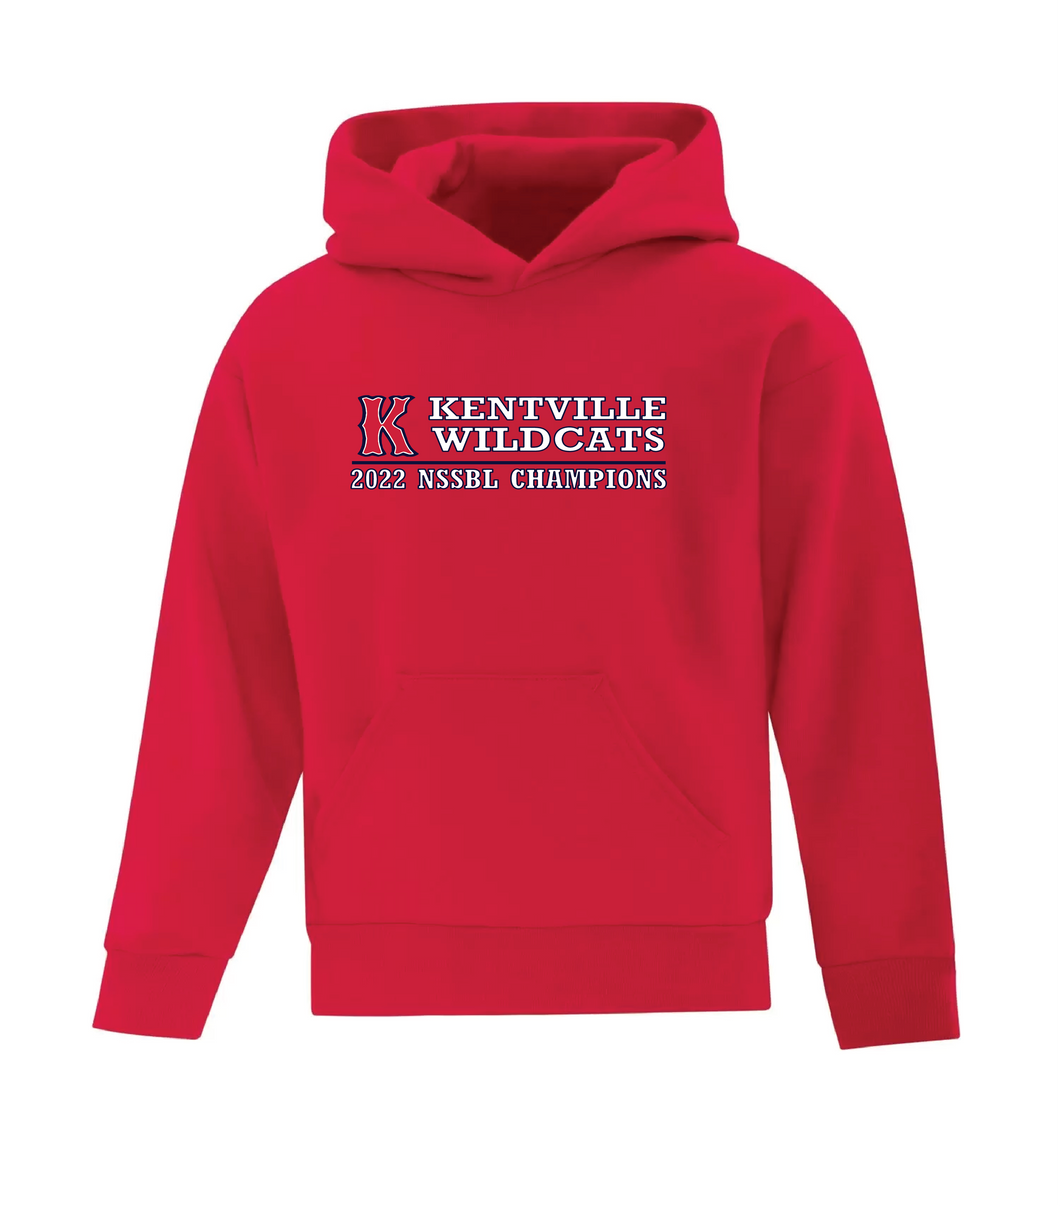 Kentville Wildcats 2022 NSSBL Champions Youth Hoodie